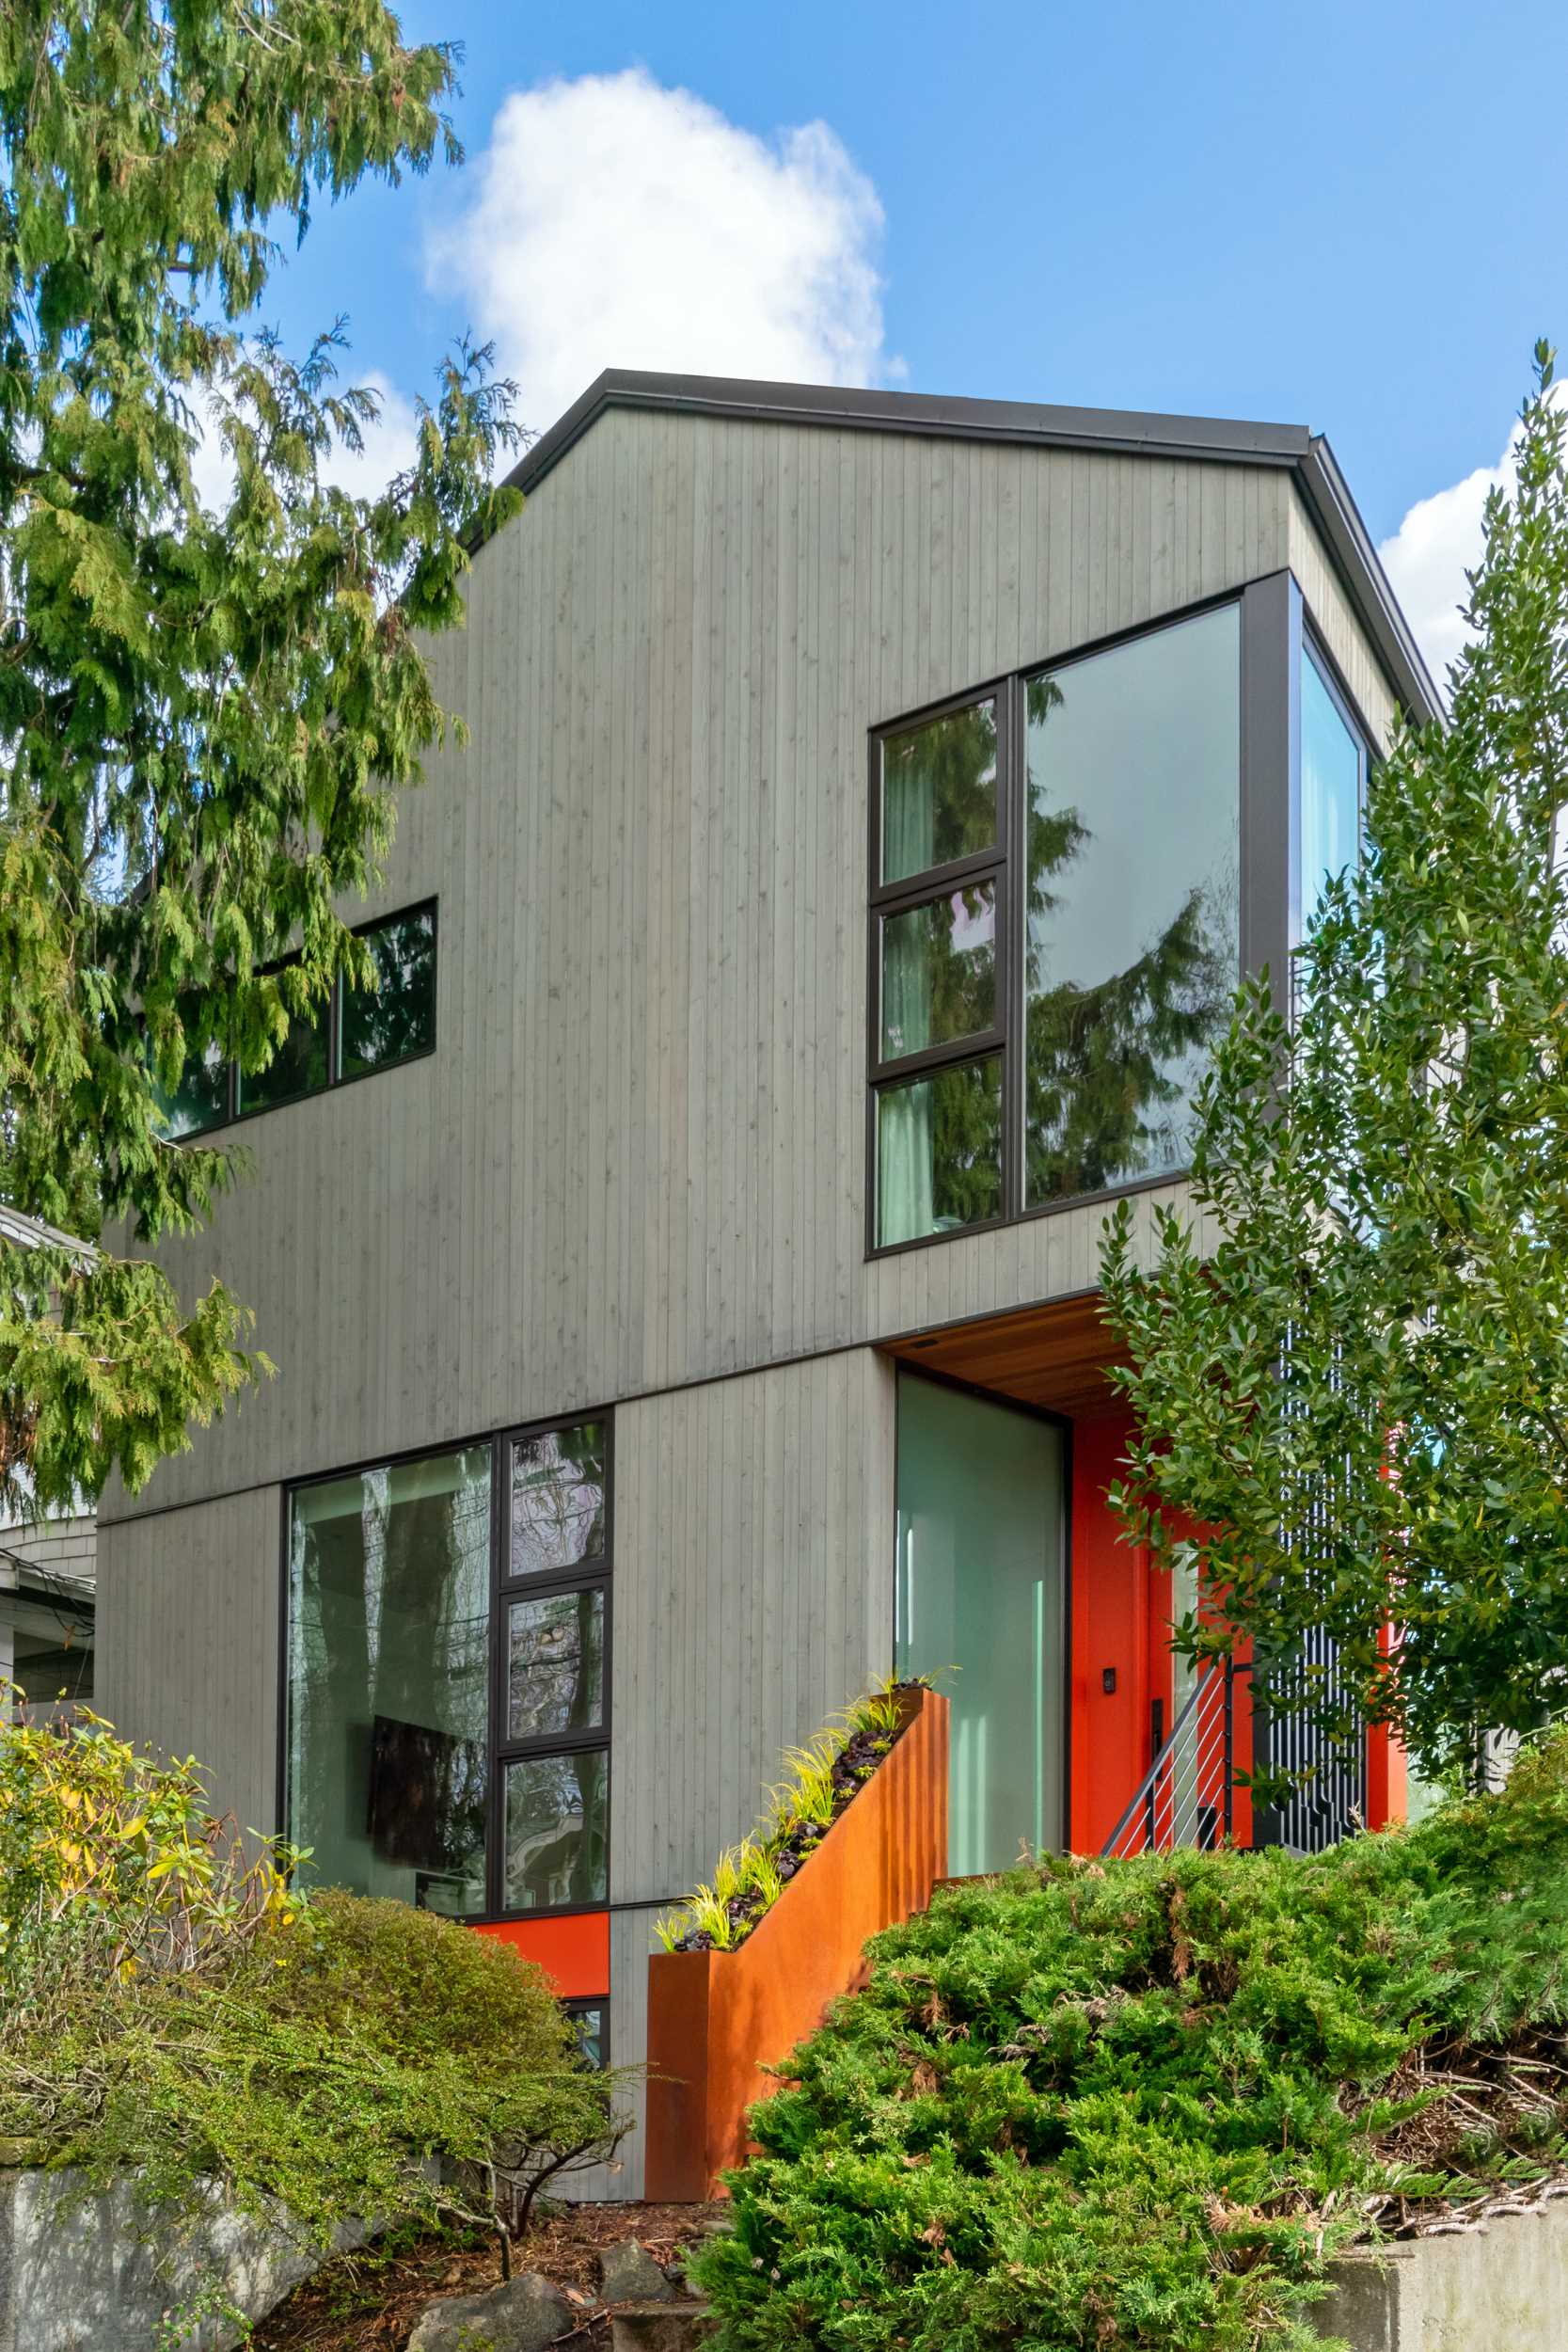 A modern house with a colorful front door, a steel planter, and a screen for added privacy.